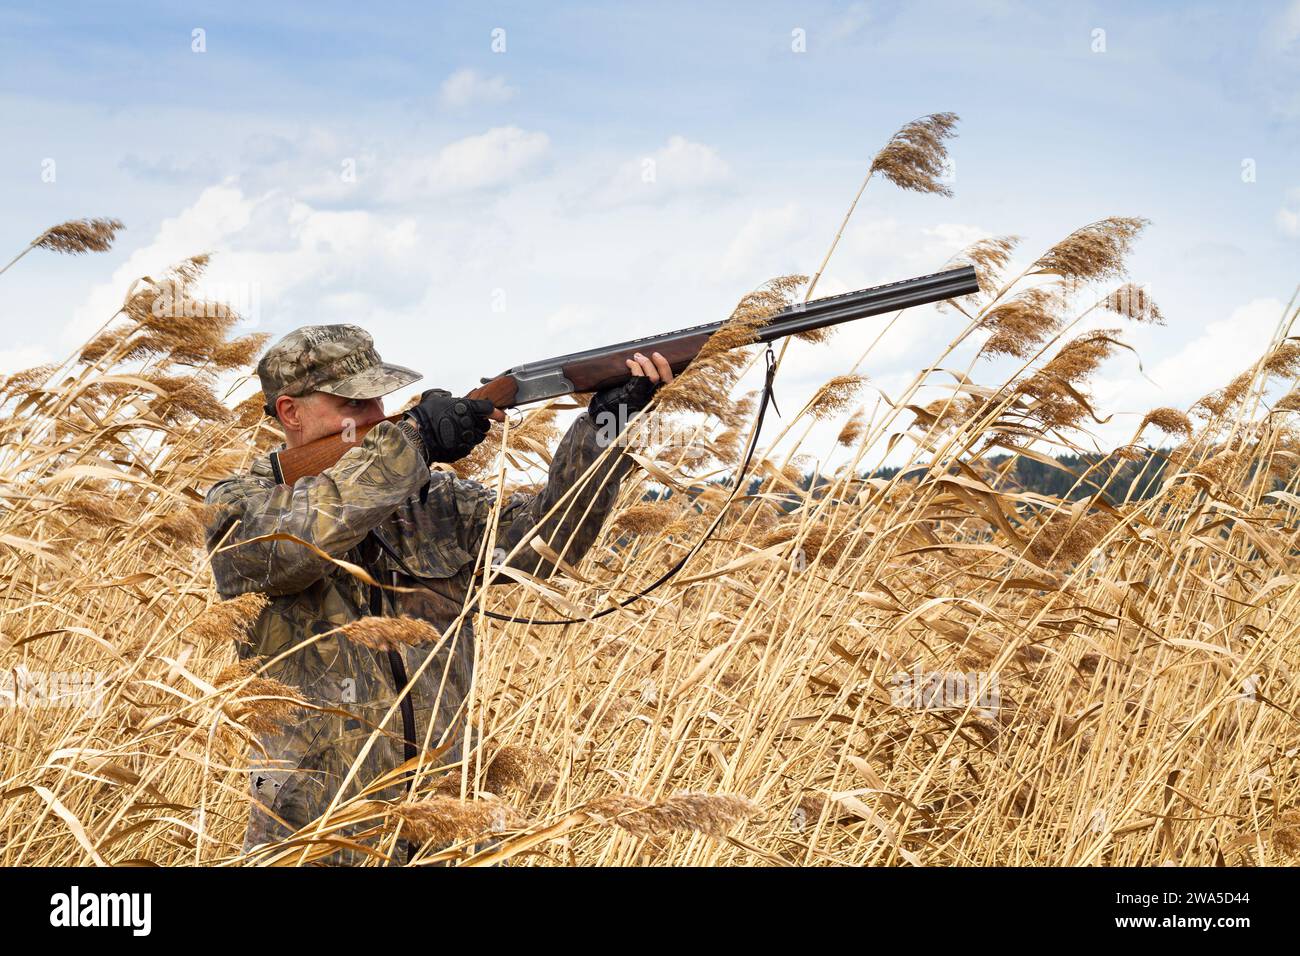 In late autumn, the grass turned yellow on the shore of the lake. The duck hunter takes aim with his shotgun. He stands in the tall reeds. Stock Photo